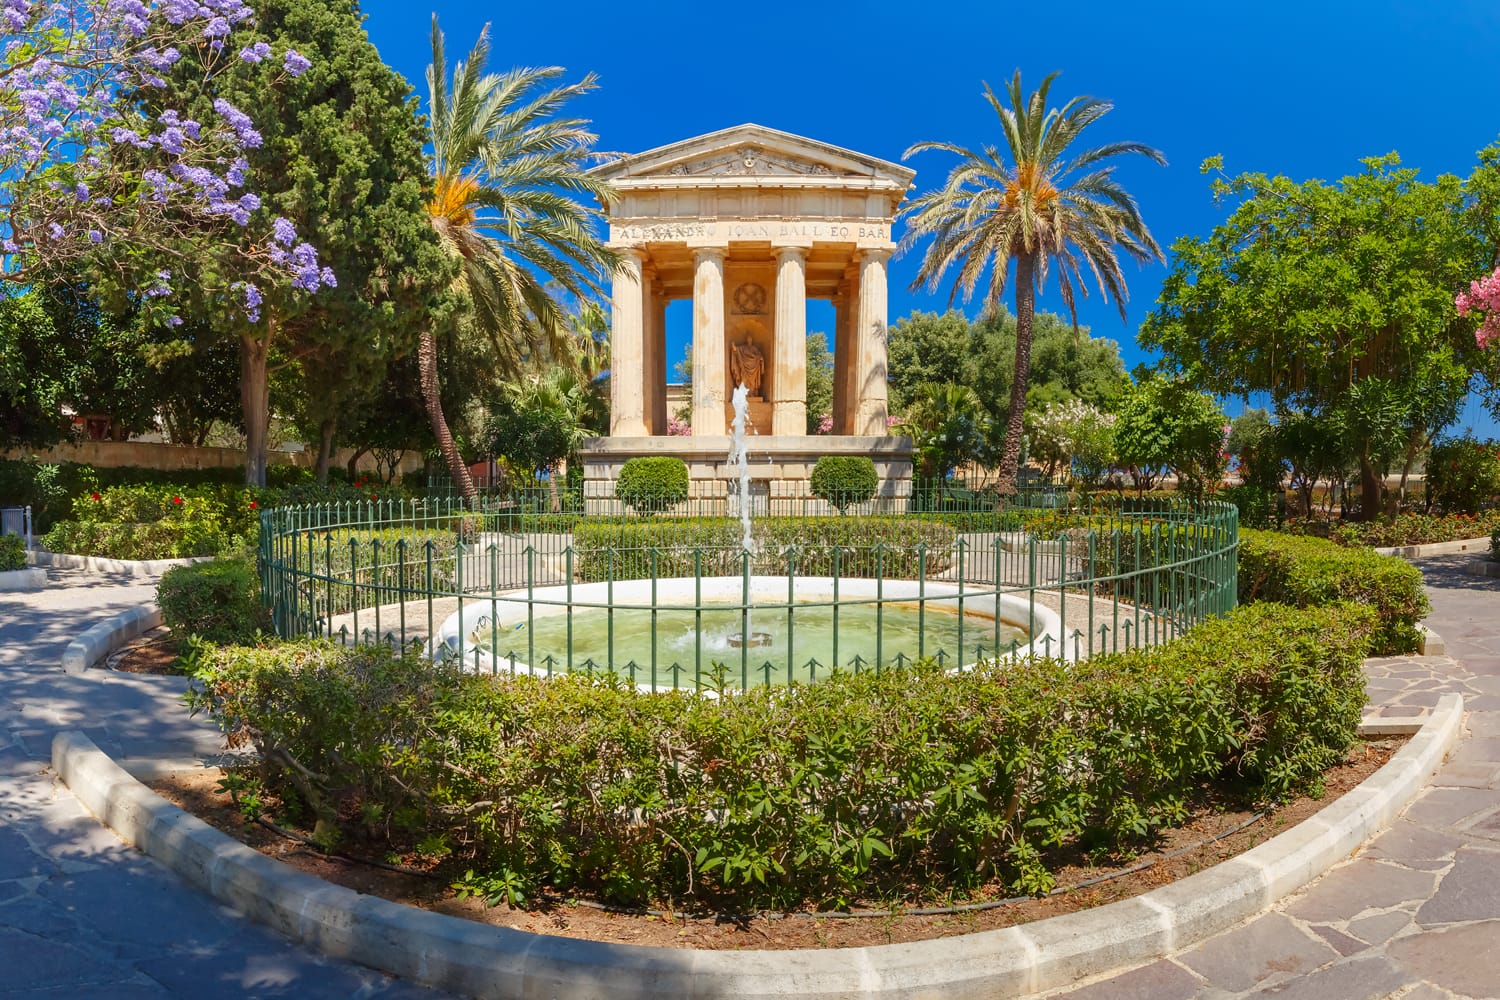 Panorama of blossoming spring Lower Barrakka Gardens and monument dedicated to Alexander Ball in the old town Valletta, capital of Malta